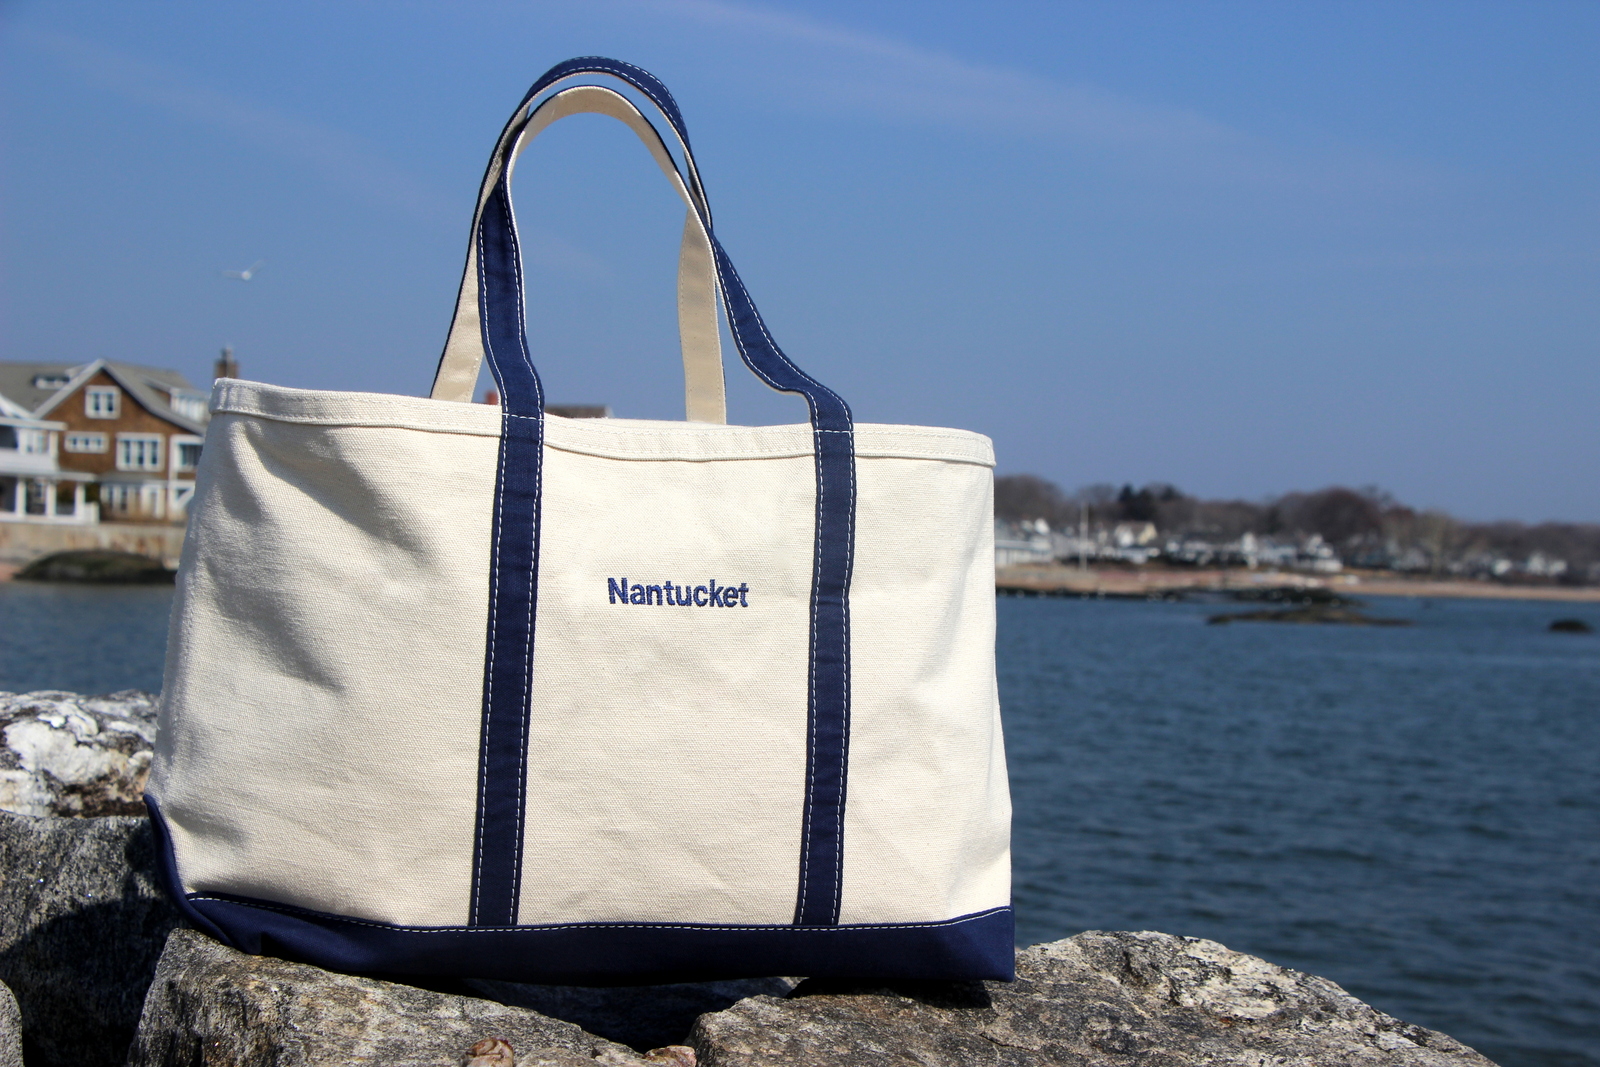 Salt Water New England: Canvas Boat Bags and The L.L. Bean Boat and Tote Bag